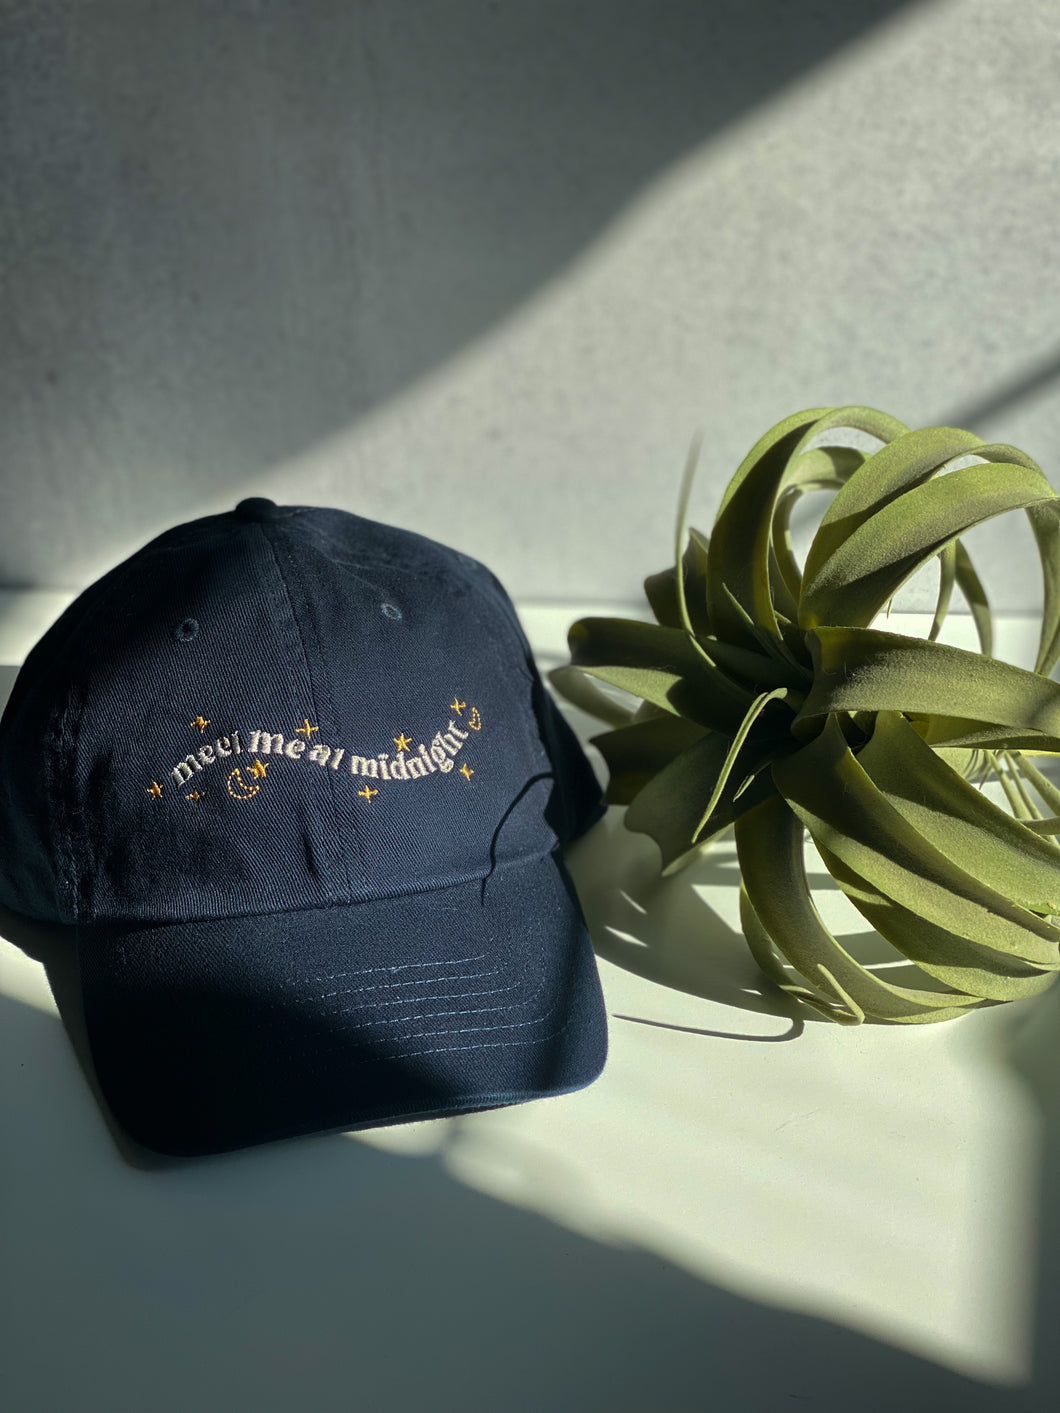 Meet me at midnight Relaxed Fit Hat